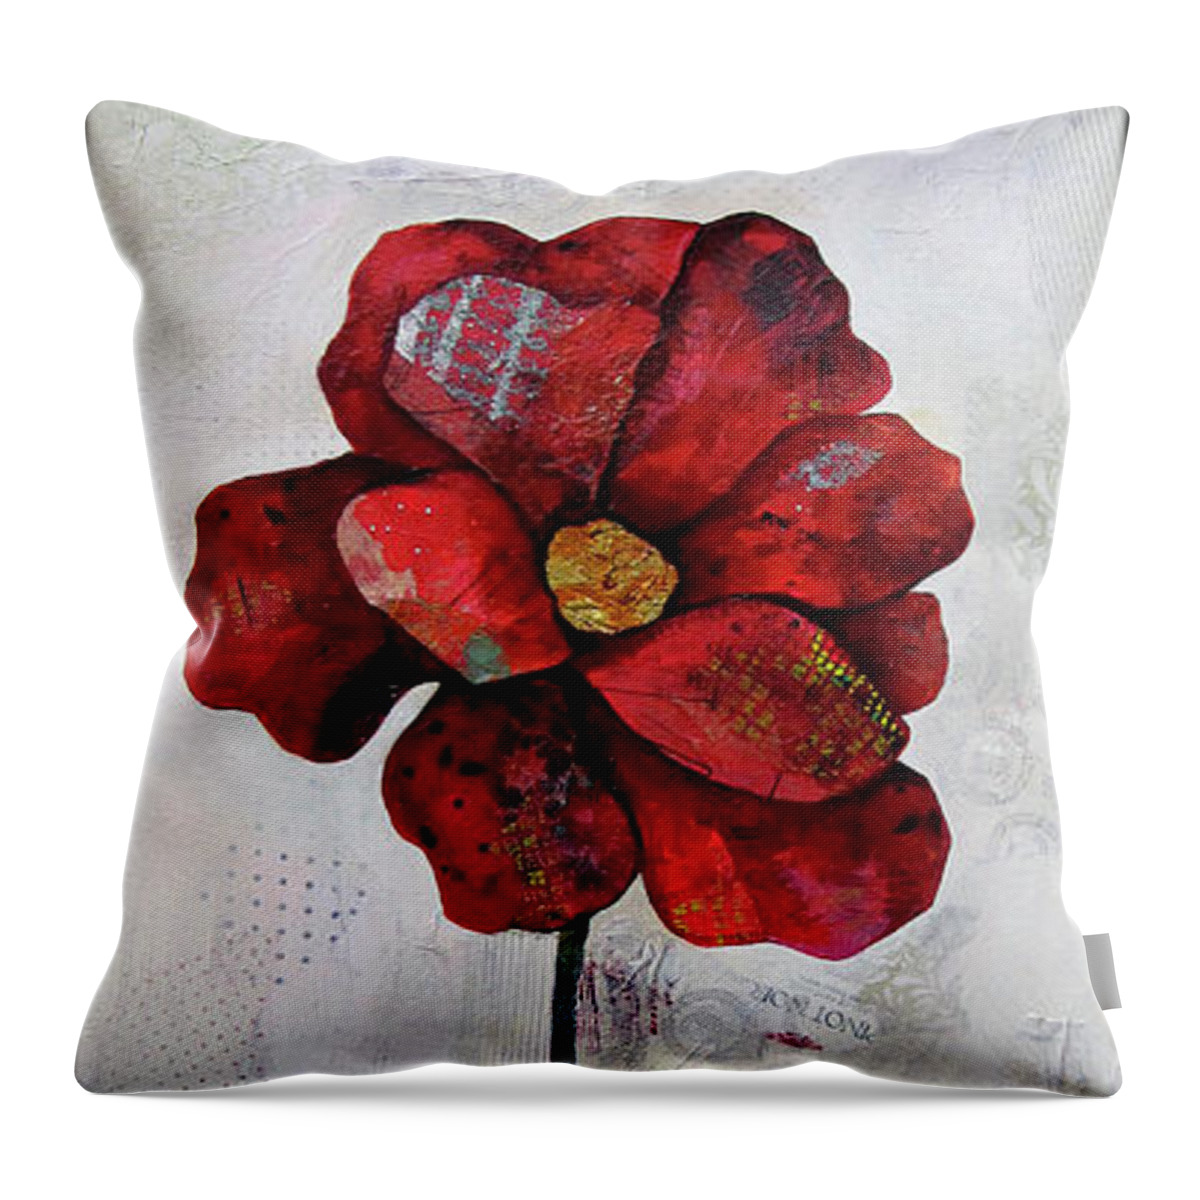 Winter Throw Pillow featuring the painting Winter Poppy II by Shadia Derbyshire